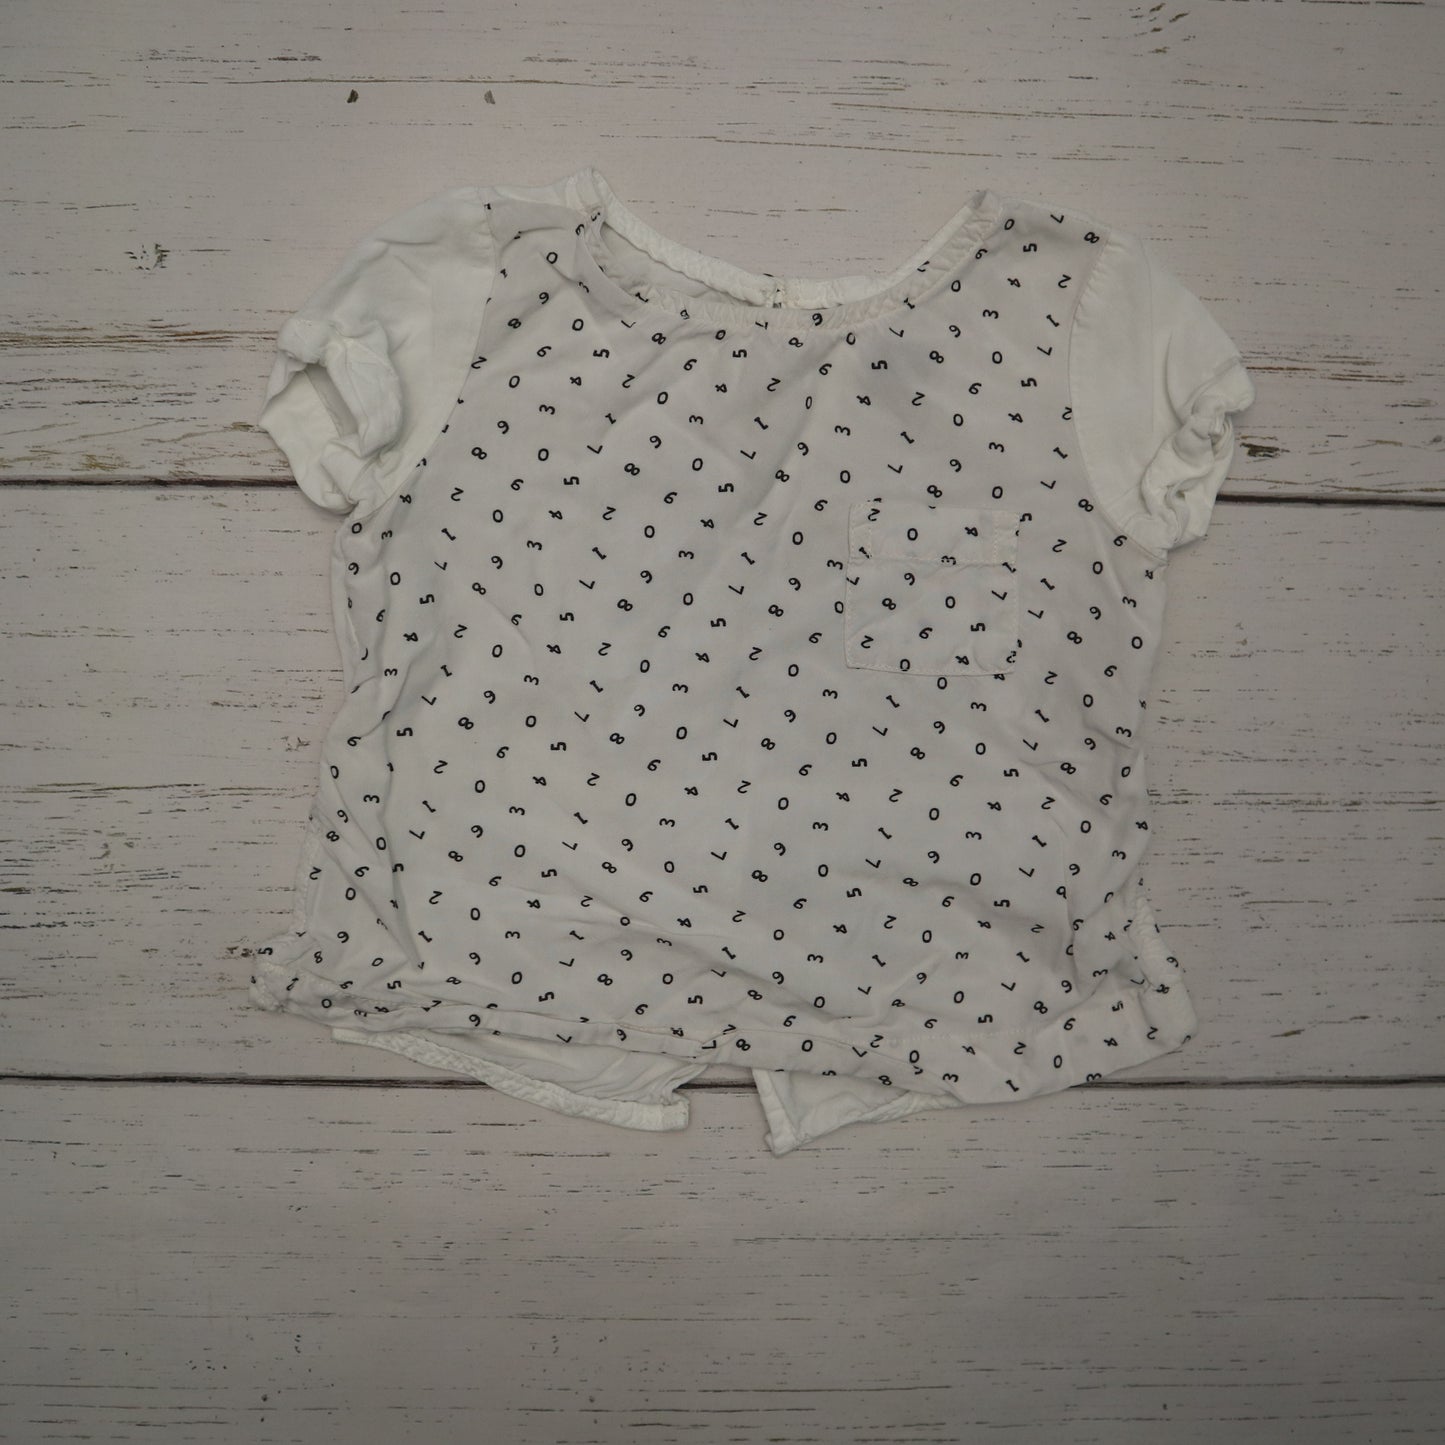 Old Navy - T-Shirt (2T)